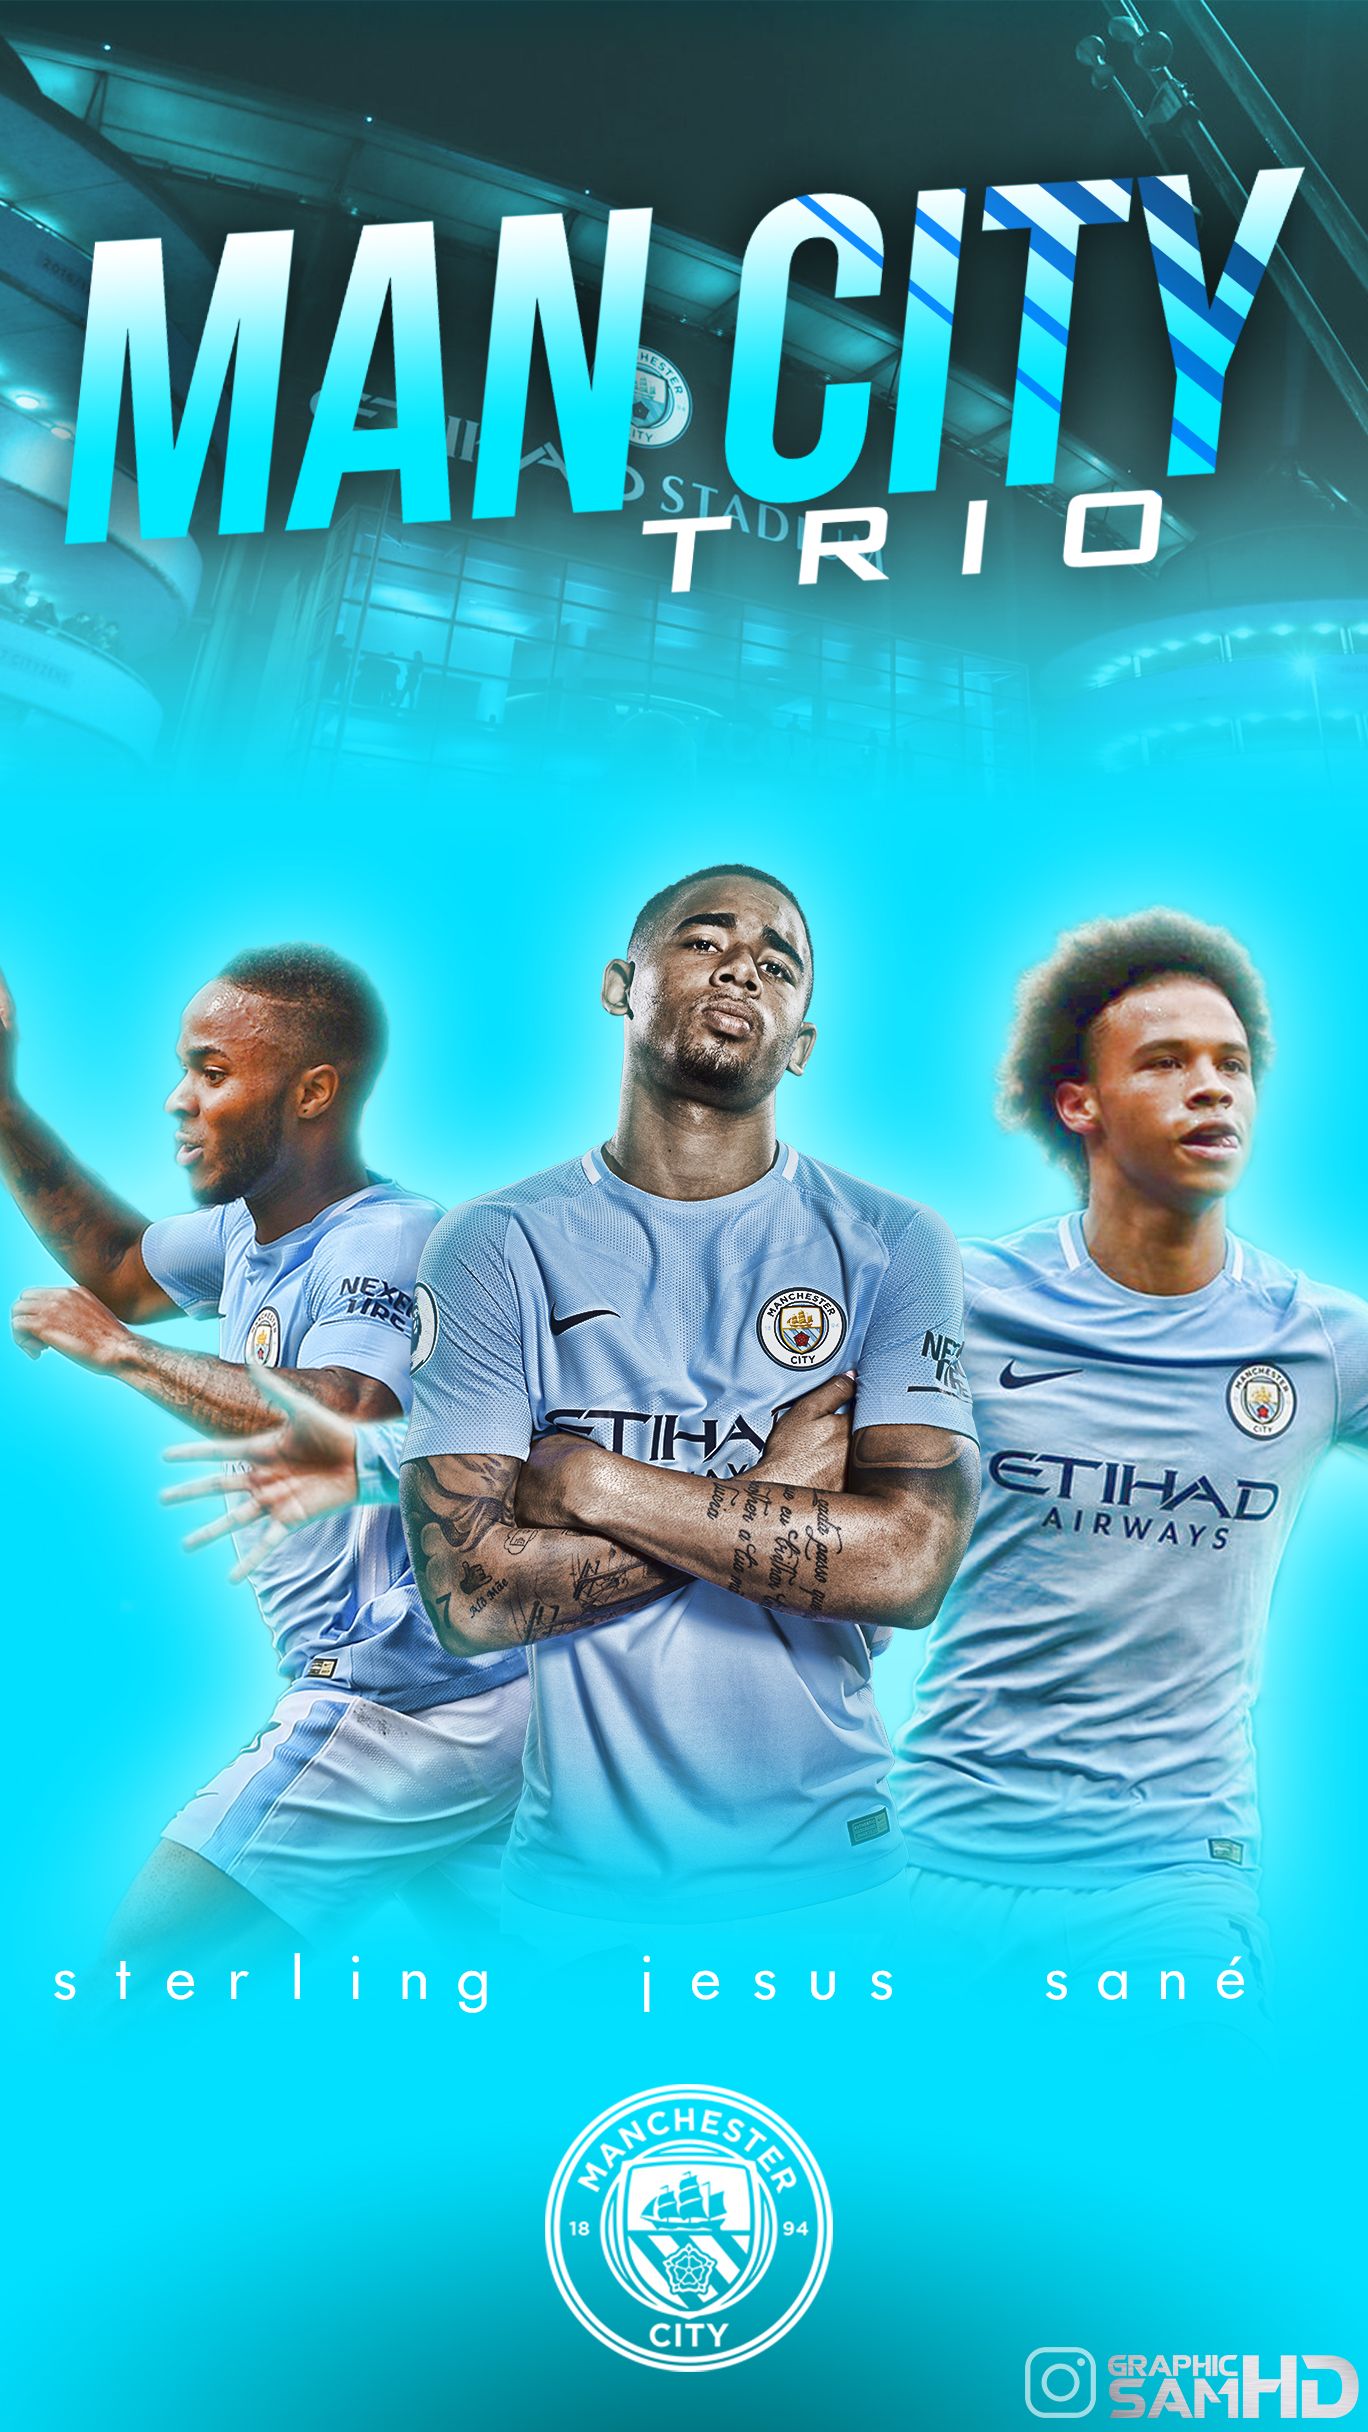 Manchester City Phone Wallpapers - Wallpaper Cave